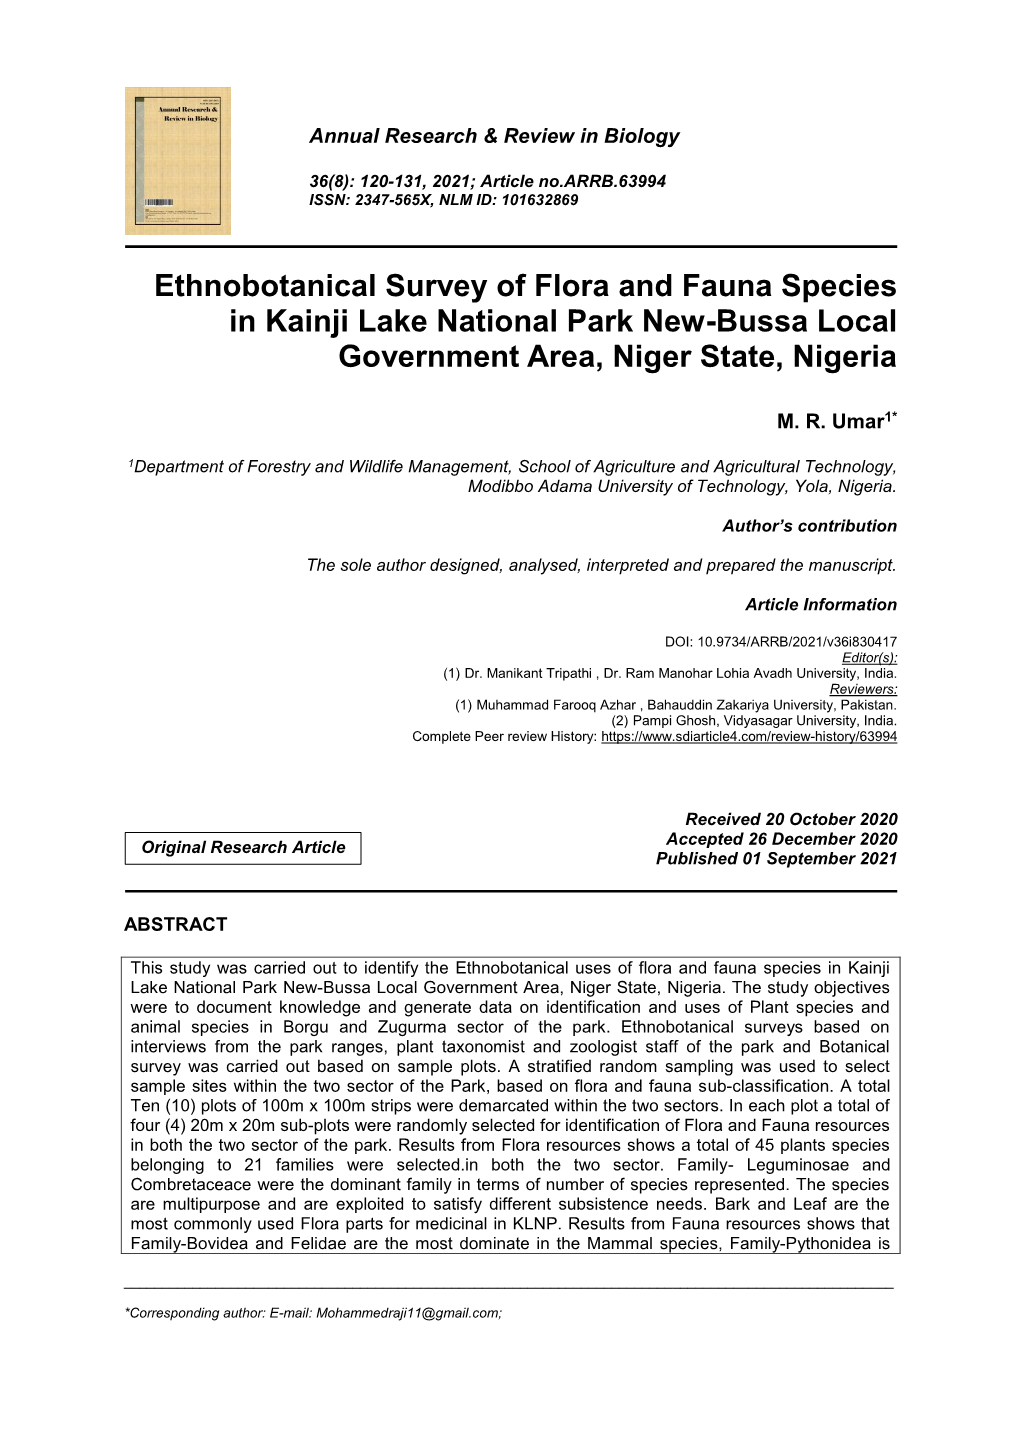 Ethnobotanical Survey of Flora and Fauna Species in Kainji Lake National Park New-Bussa Local Government Area, Niger State, Nigeria